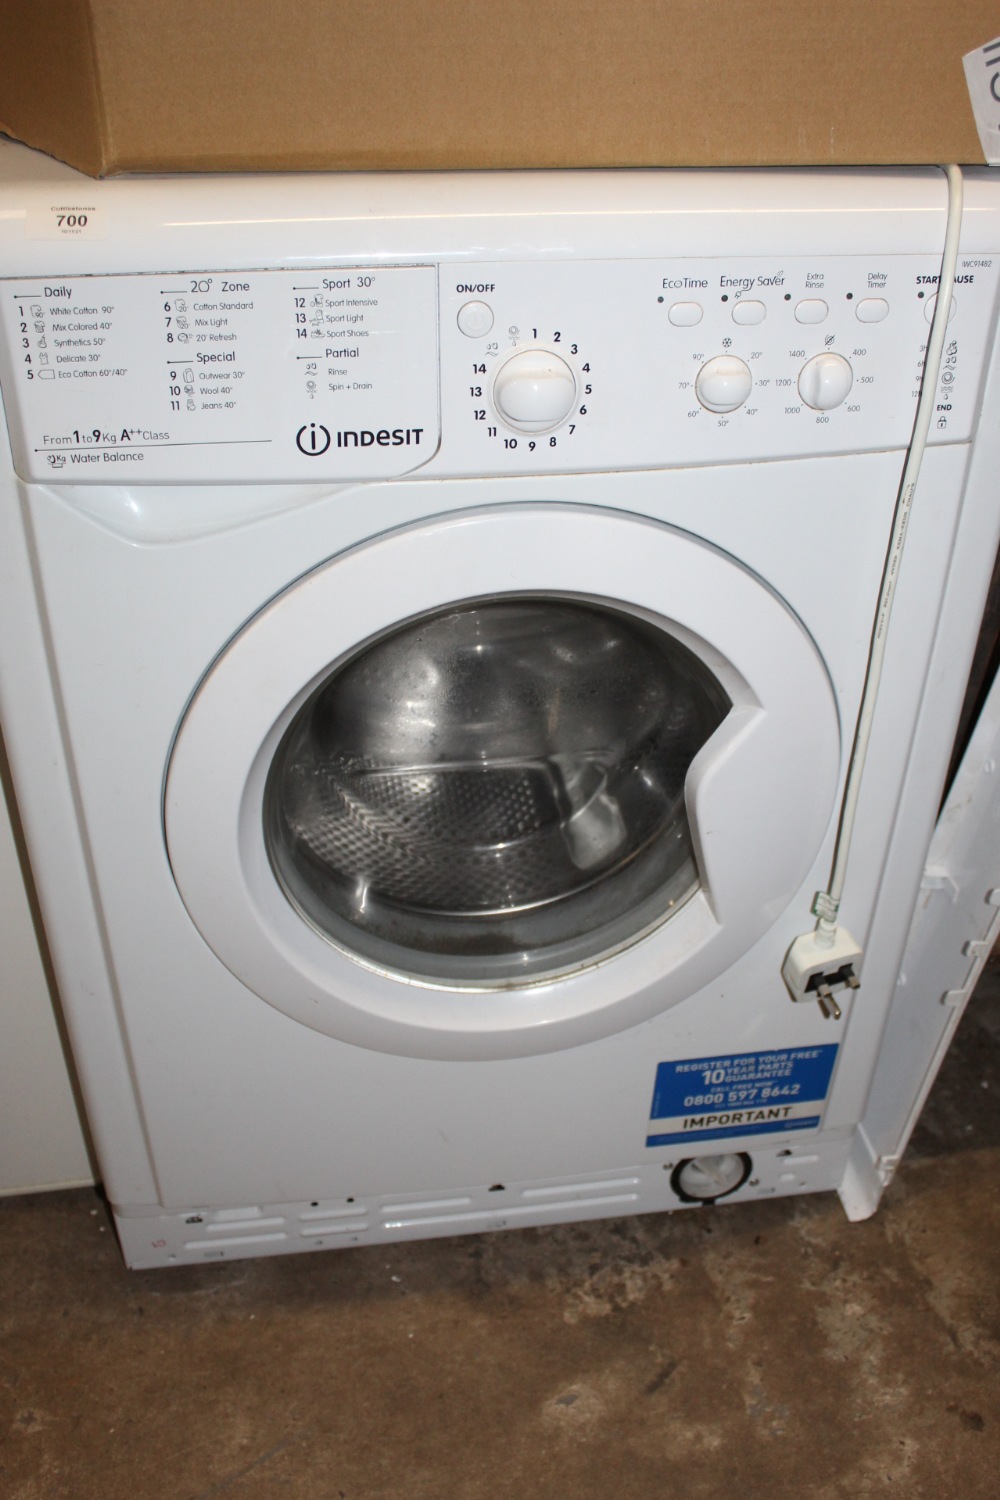 AN INDESIT WASHING MACHINE - HOUSE CLEARANCE